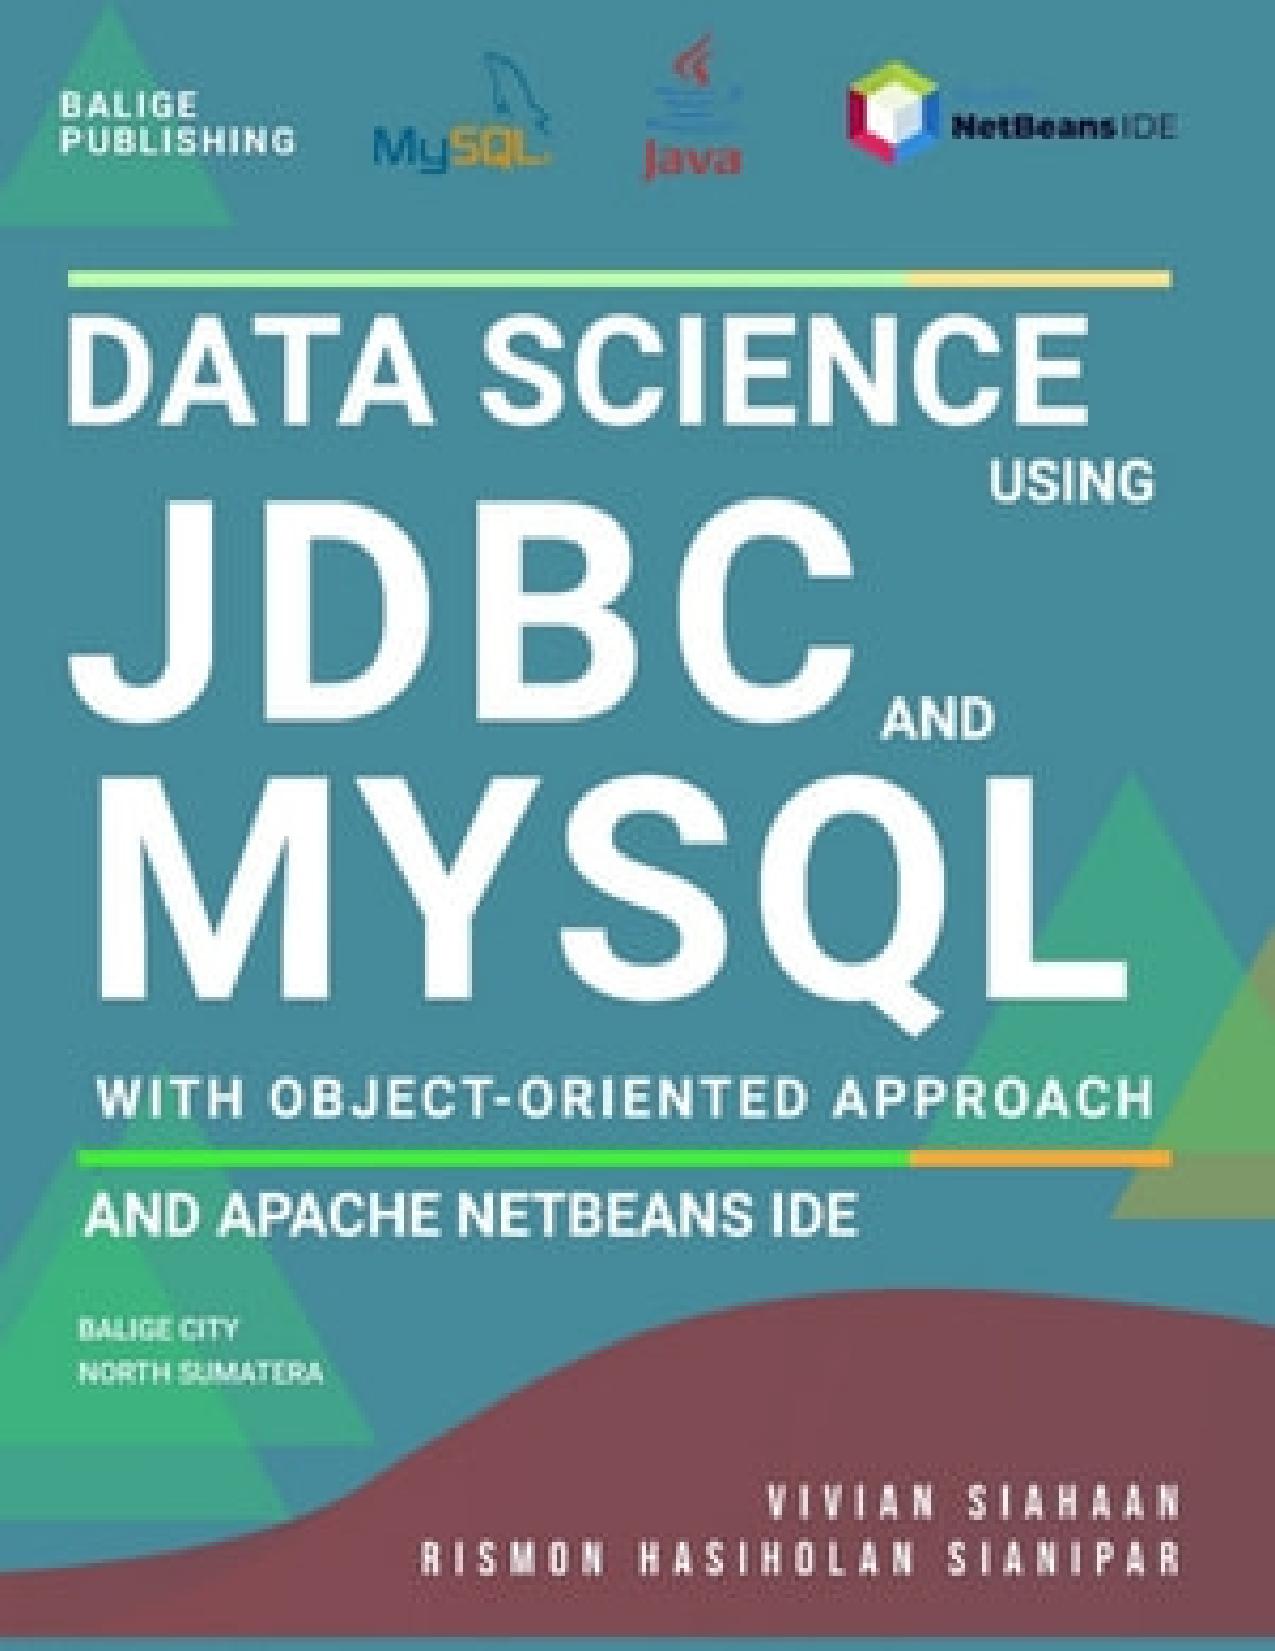 DATA SCIENCE USING JDBC AND MYSQL WITH OBJECT-ORIENTED APPROACH AND APACHE NETBEANS IDE by Vivian Siahaan Rismon Hasiholan Sianipar